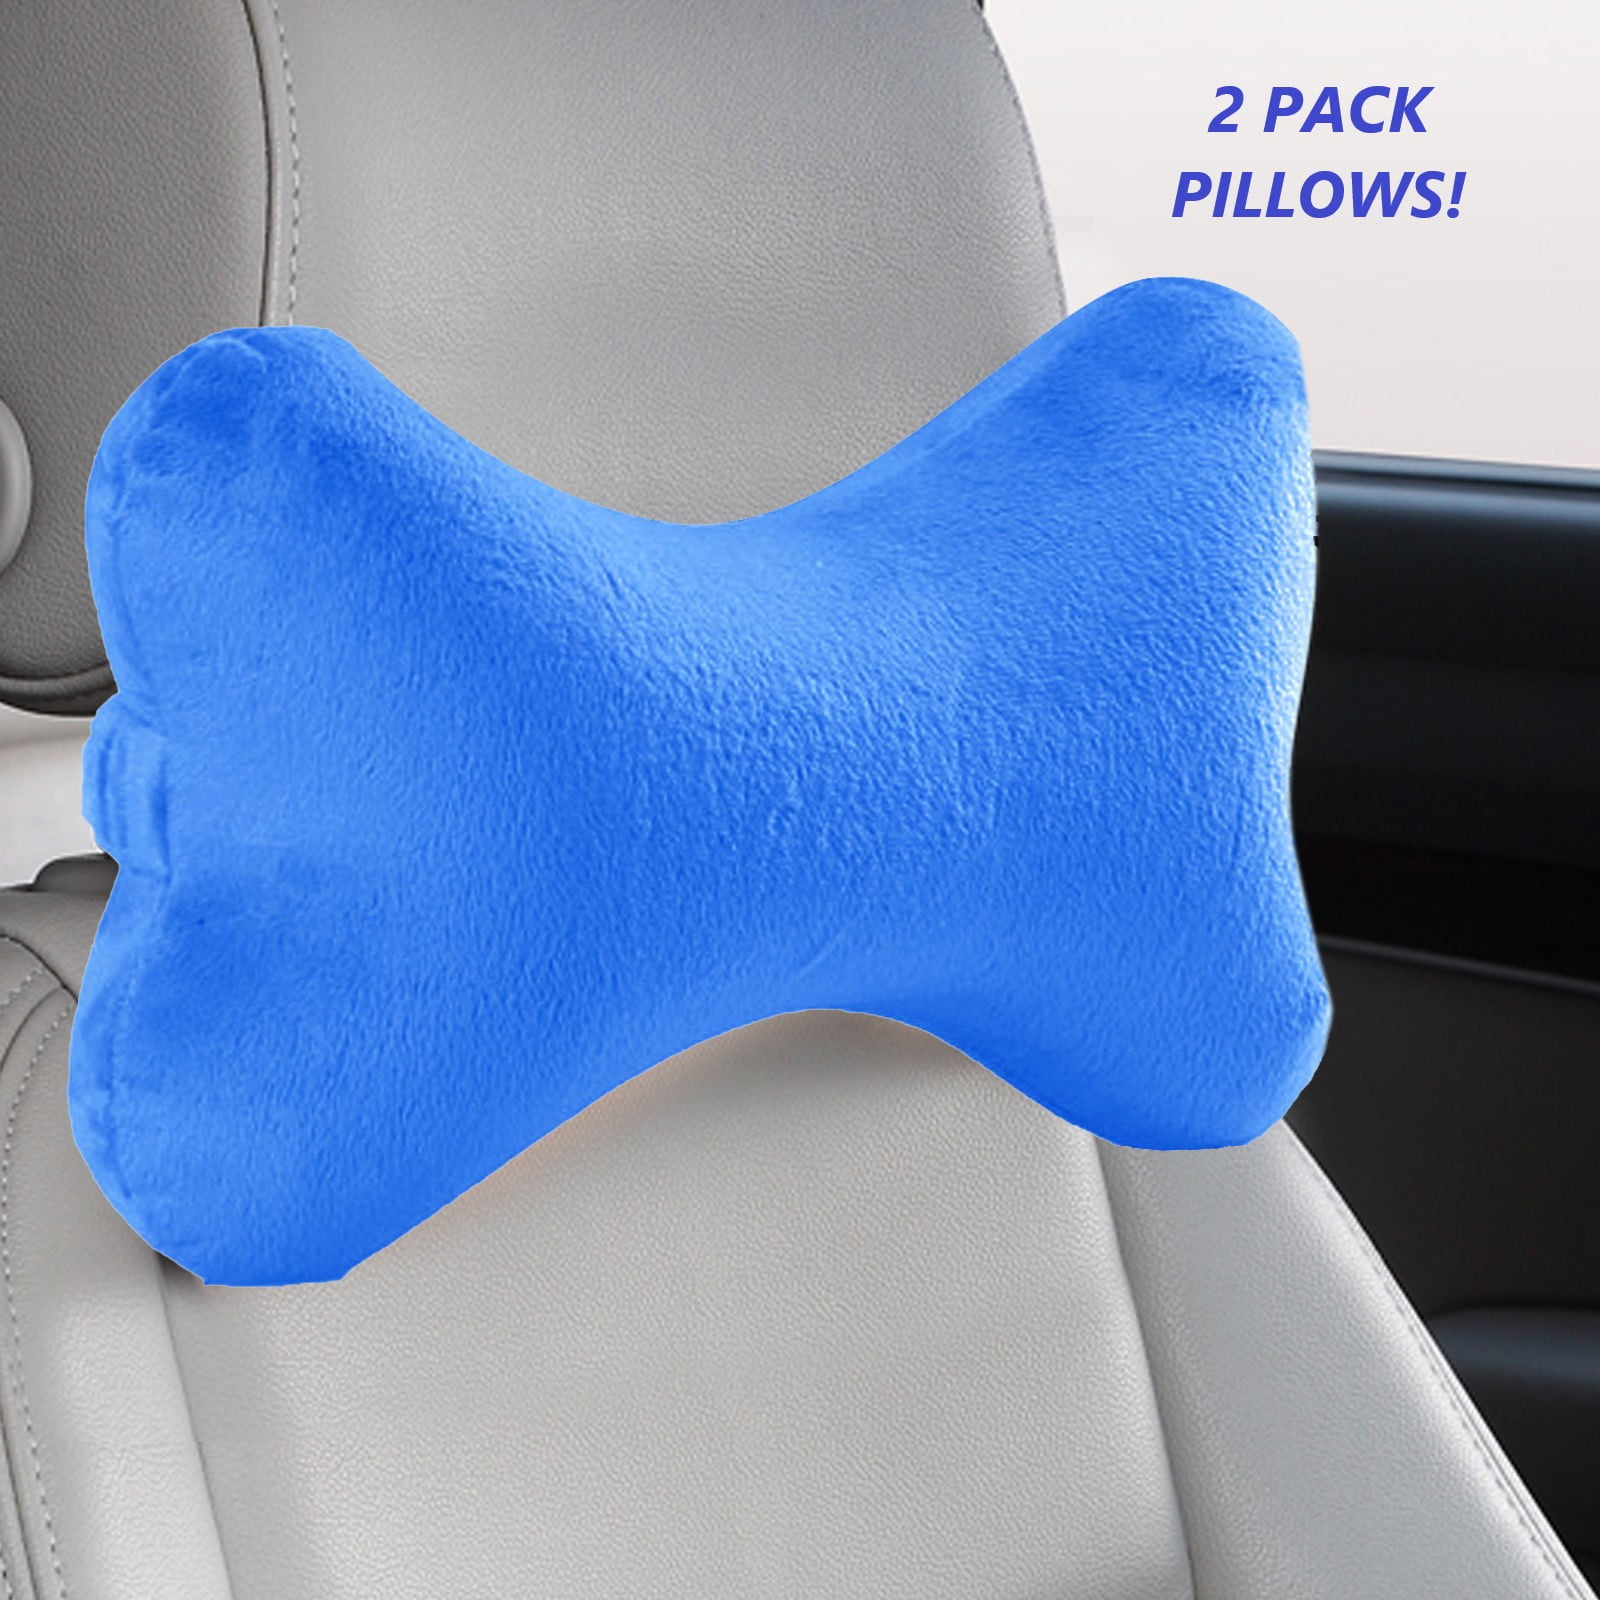 Details about   Core Products Travel Portable Cervical Neck & Head Support Sleep Pillow Headrest 